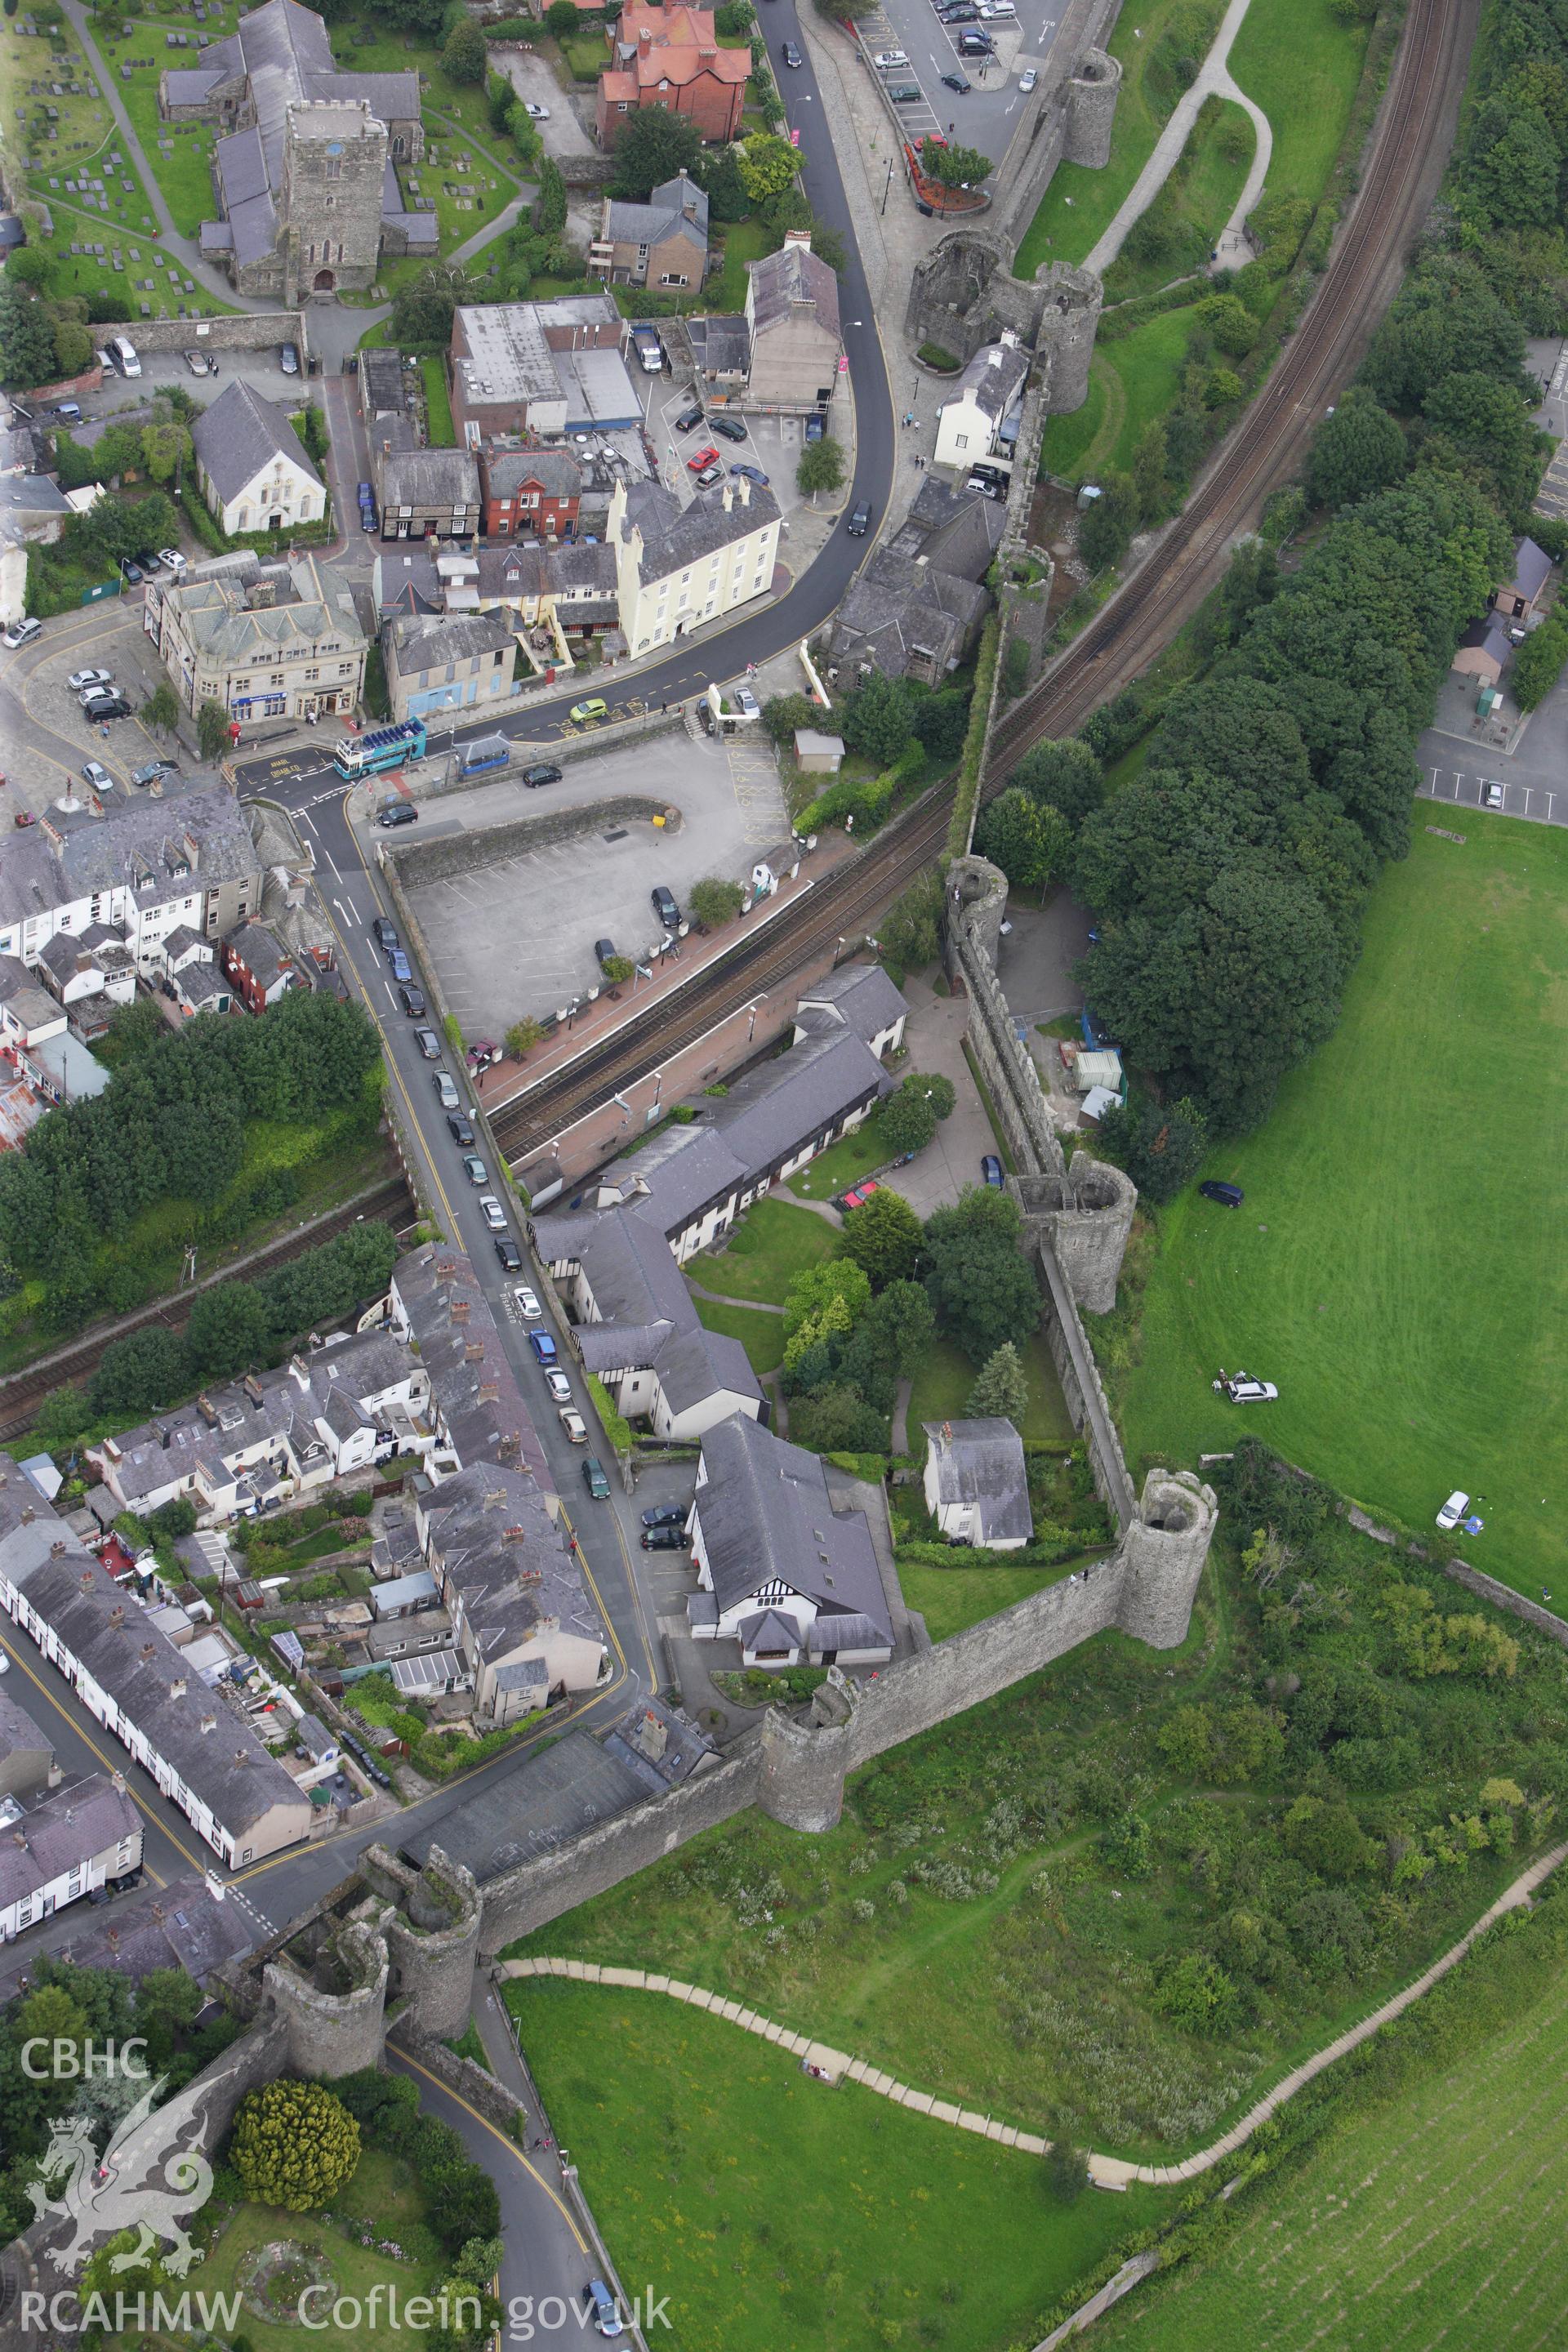 RCAHMW colour oblique aerial photograph of Conwy Town Walls. Taken on 06 August 2009 by Toby Driver